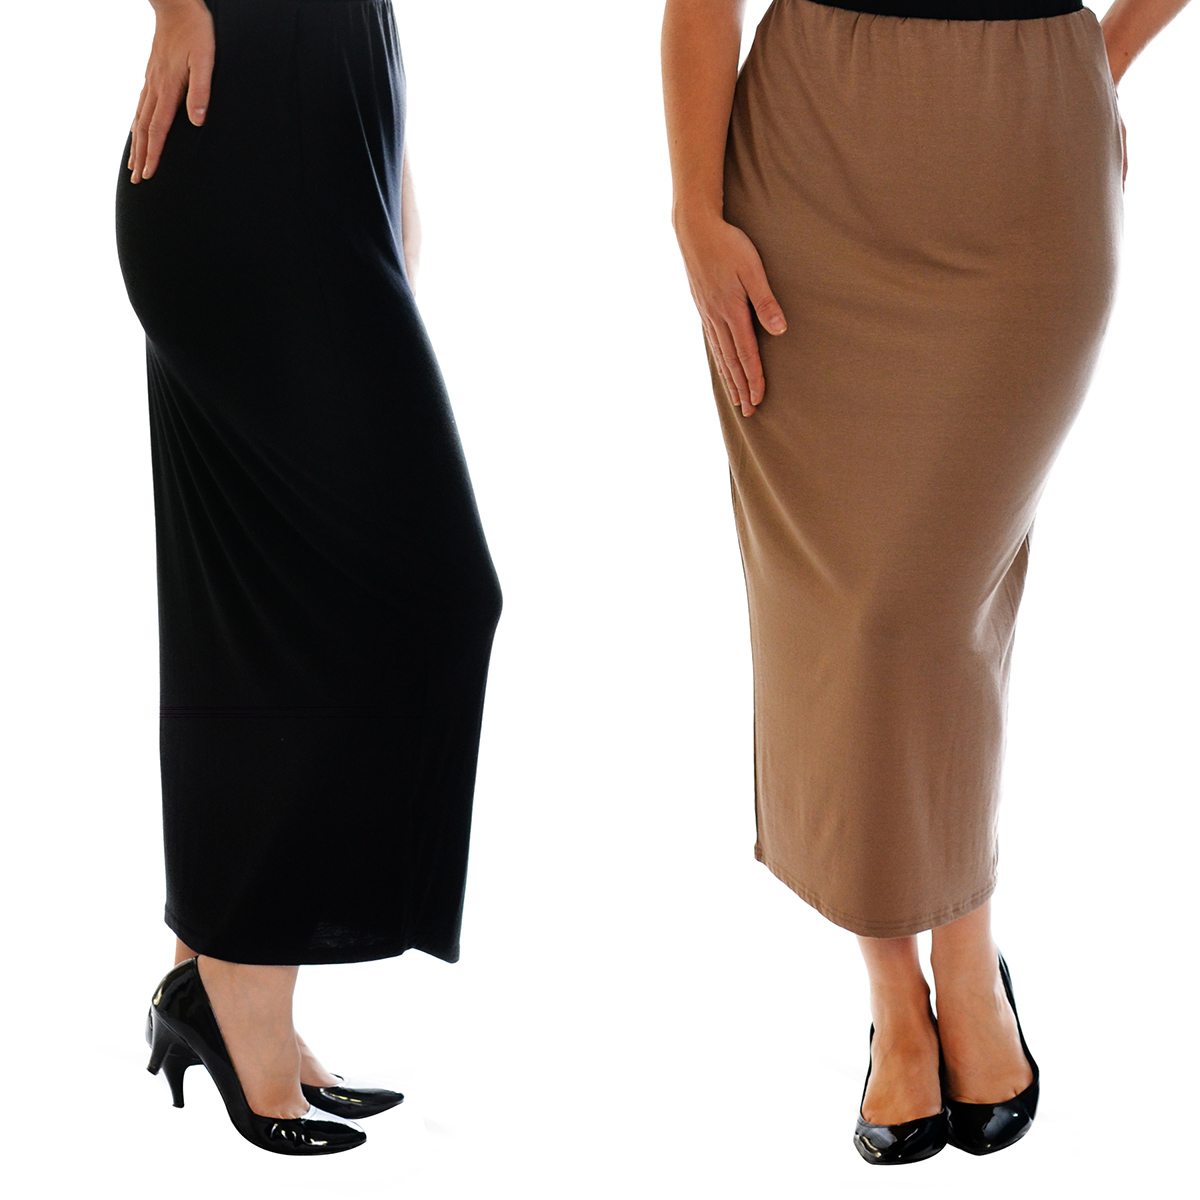 Womens Bodycon Pencil Skirts Ladies Stretch Skirt Long Office Work Sexy  Nouvelle | eBay